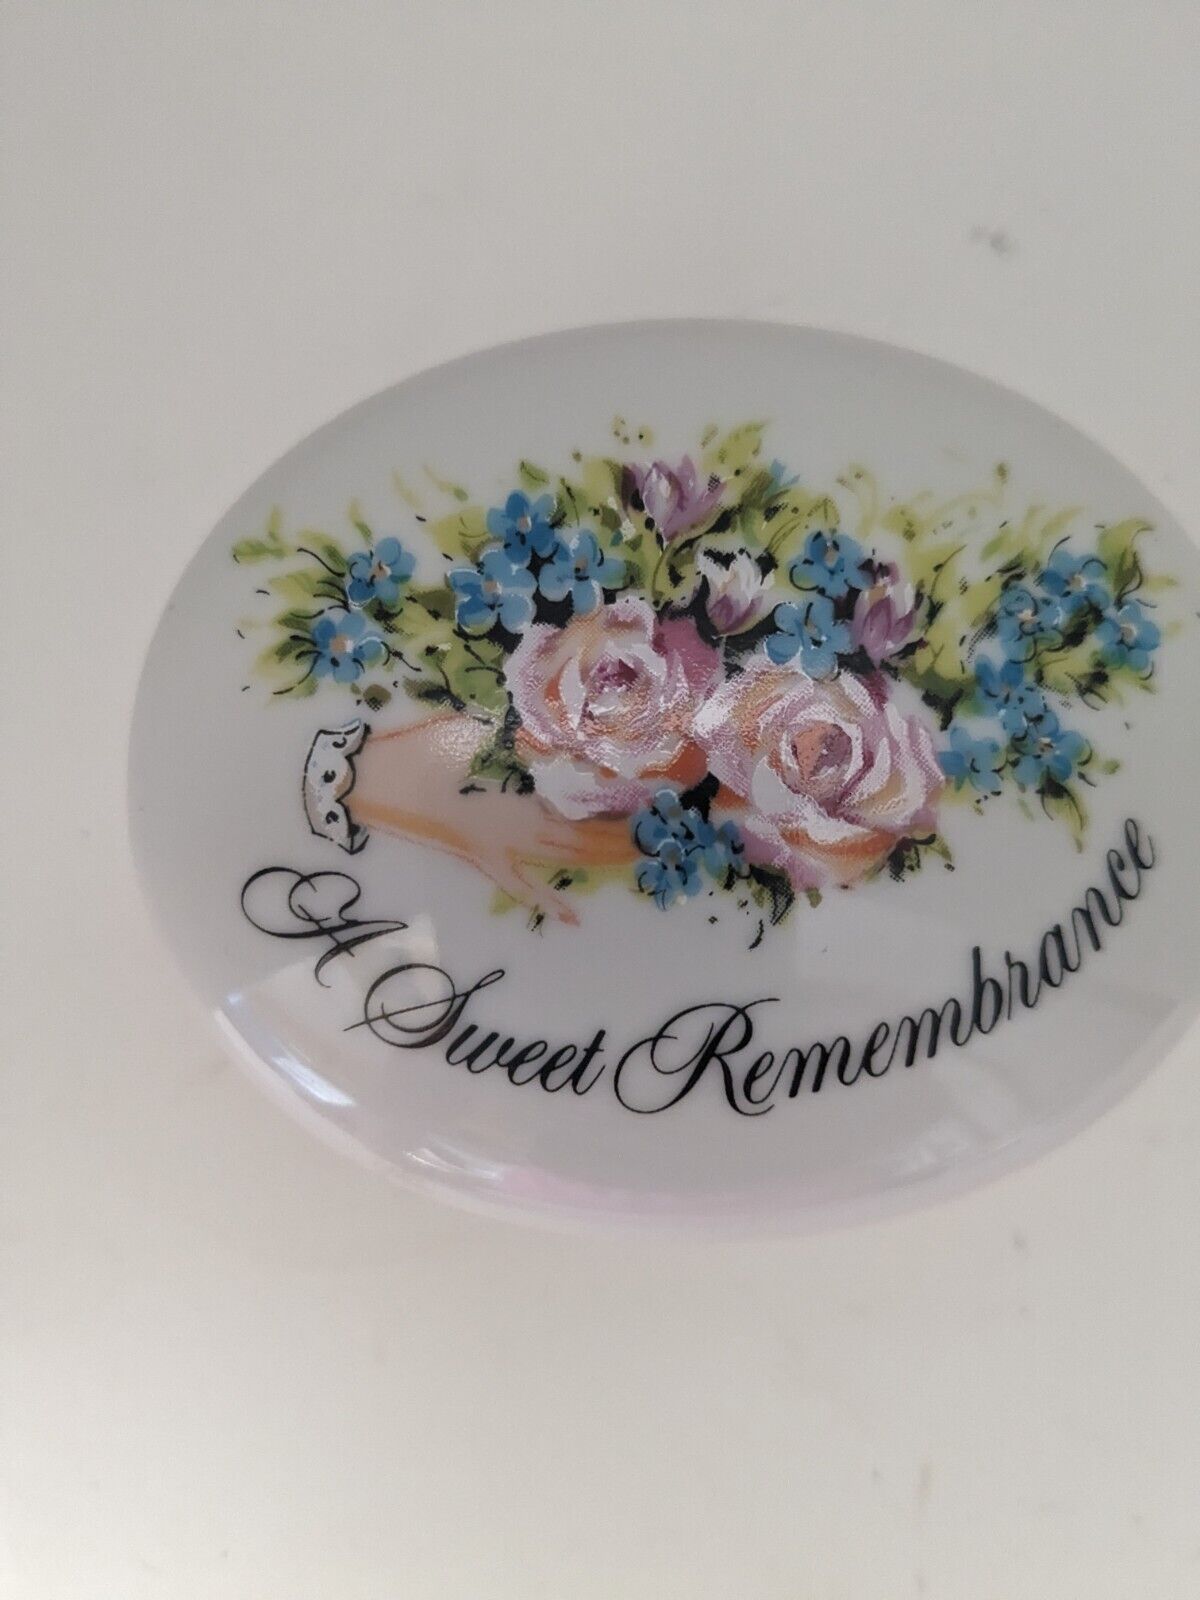 Vintage Avon Jewelry Dish - 1982 Valentines Day - A Sweet Remembrance